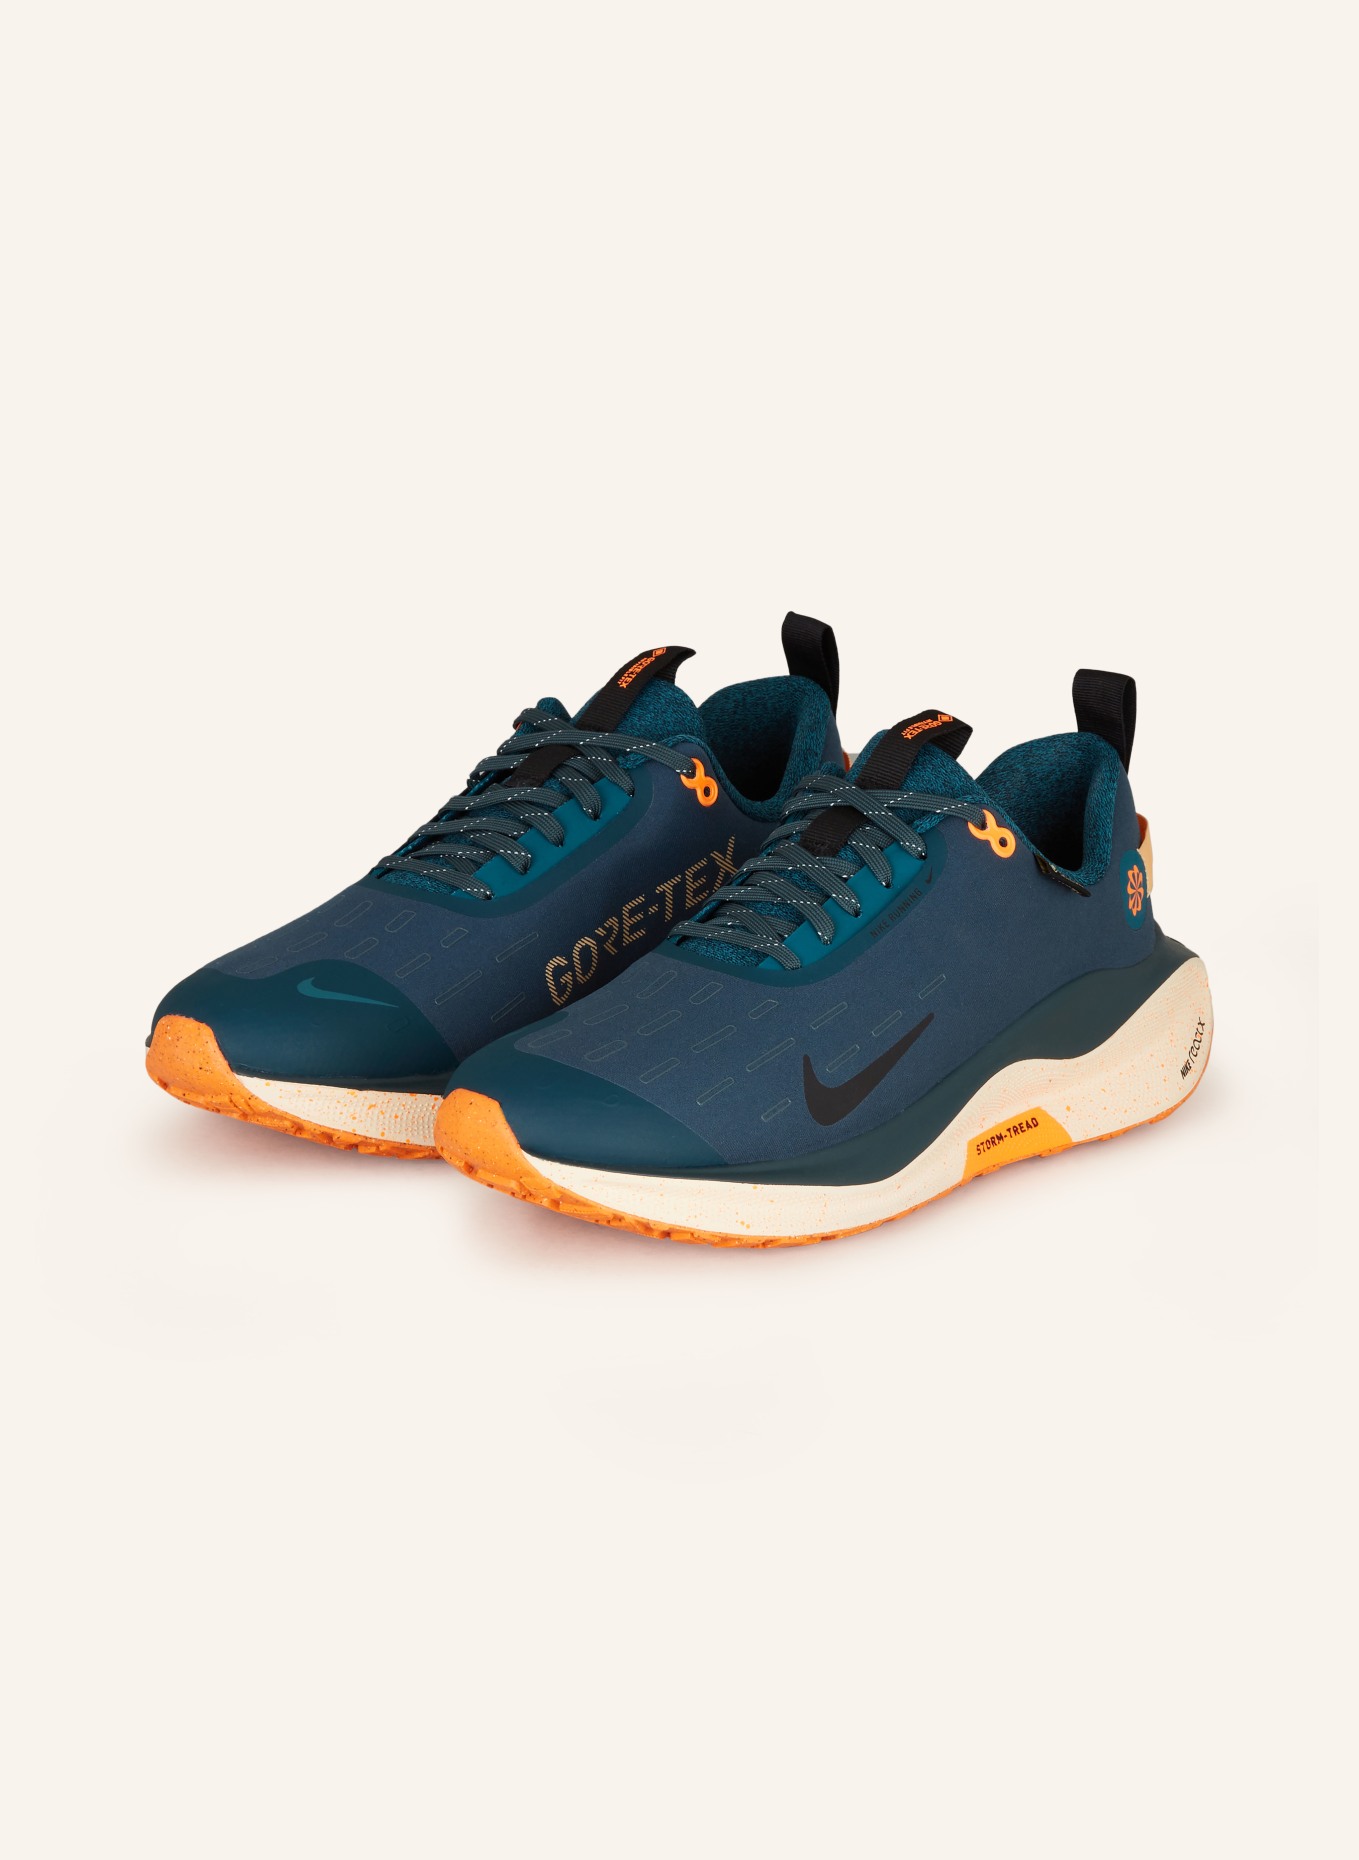 Nike Running shoes INFINITY RUN 4 REACTX GORE-TEX, Color: TEAL (Image 1)